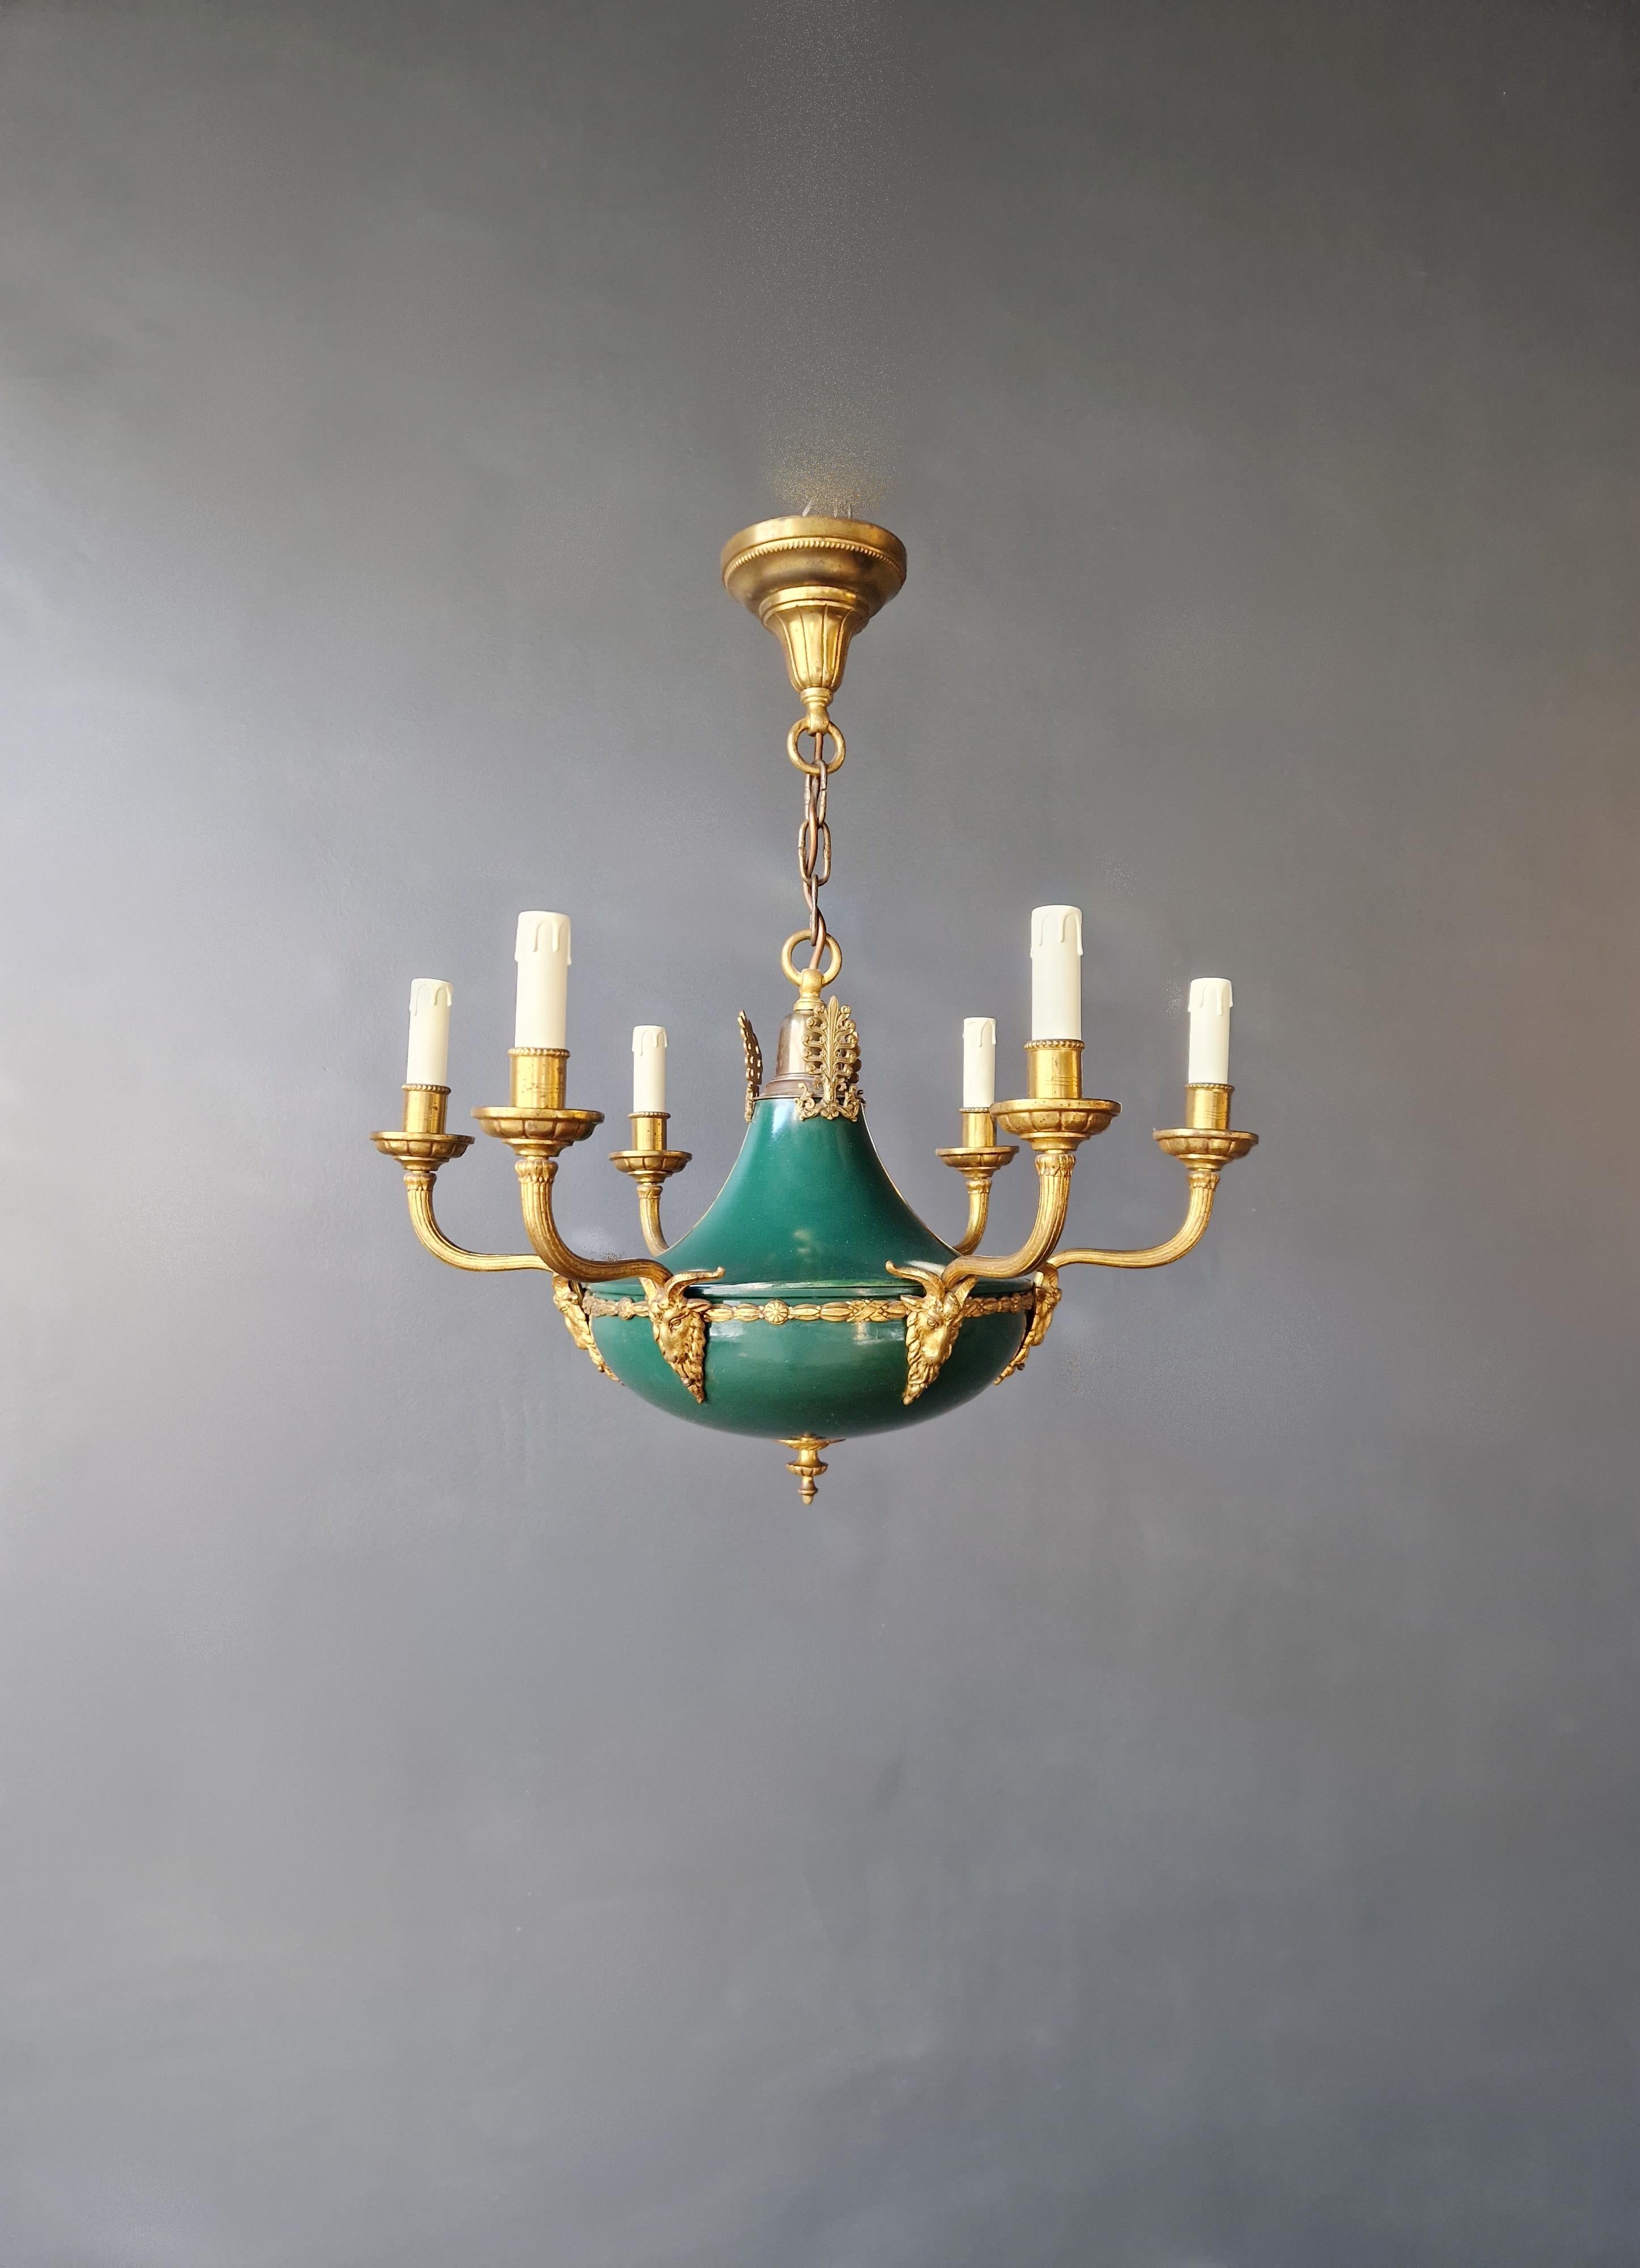 19th Century Gilt Antique Empire Lustre Neoclassical Patina Green Brass Chandelier For Sale